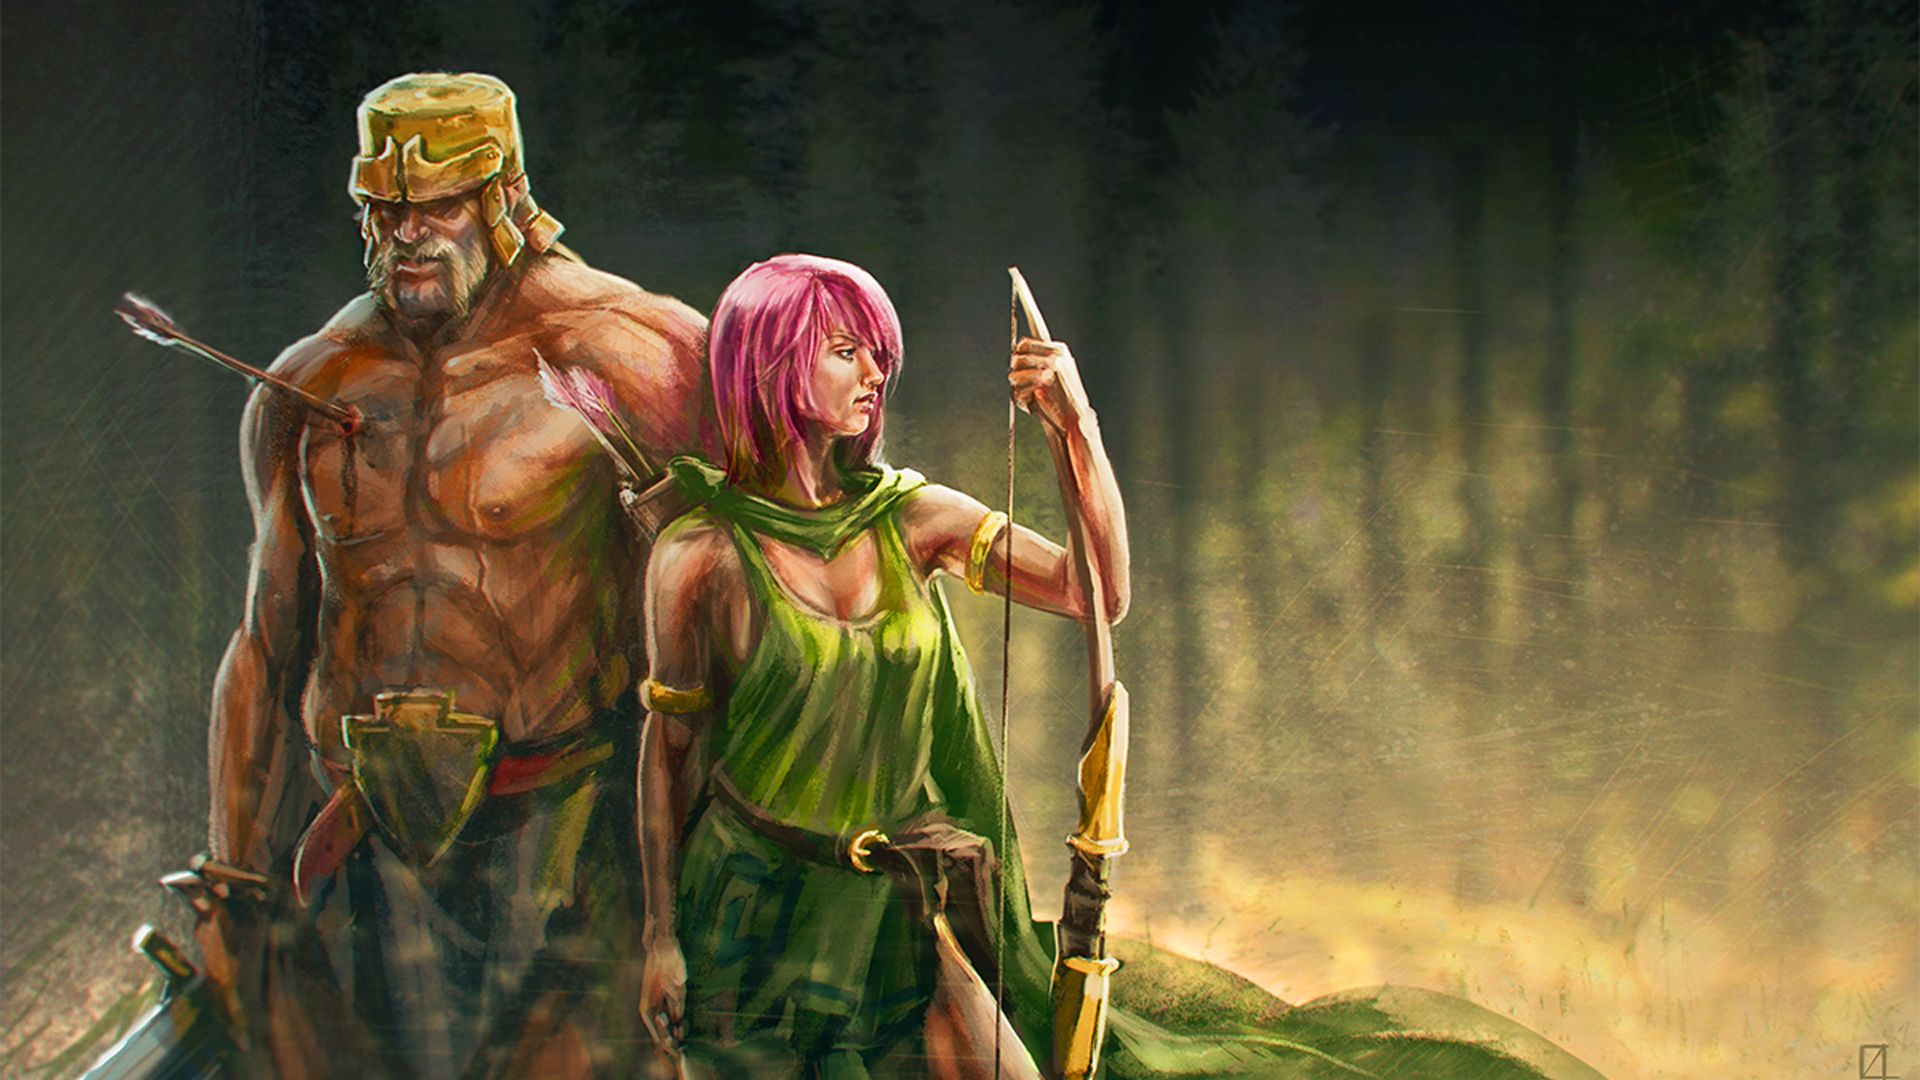 Wallpaper Clash of clans, archer & barbarian, mobile game, art